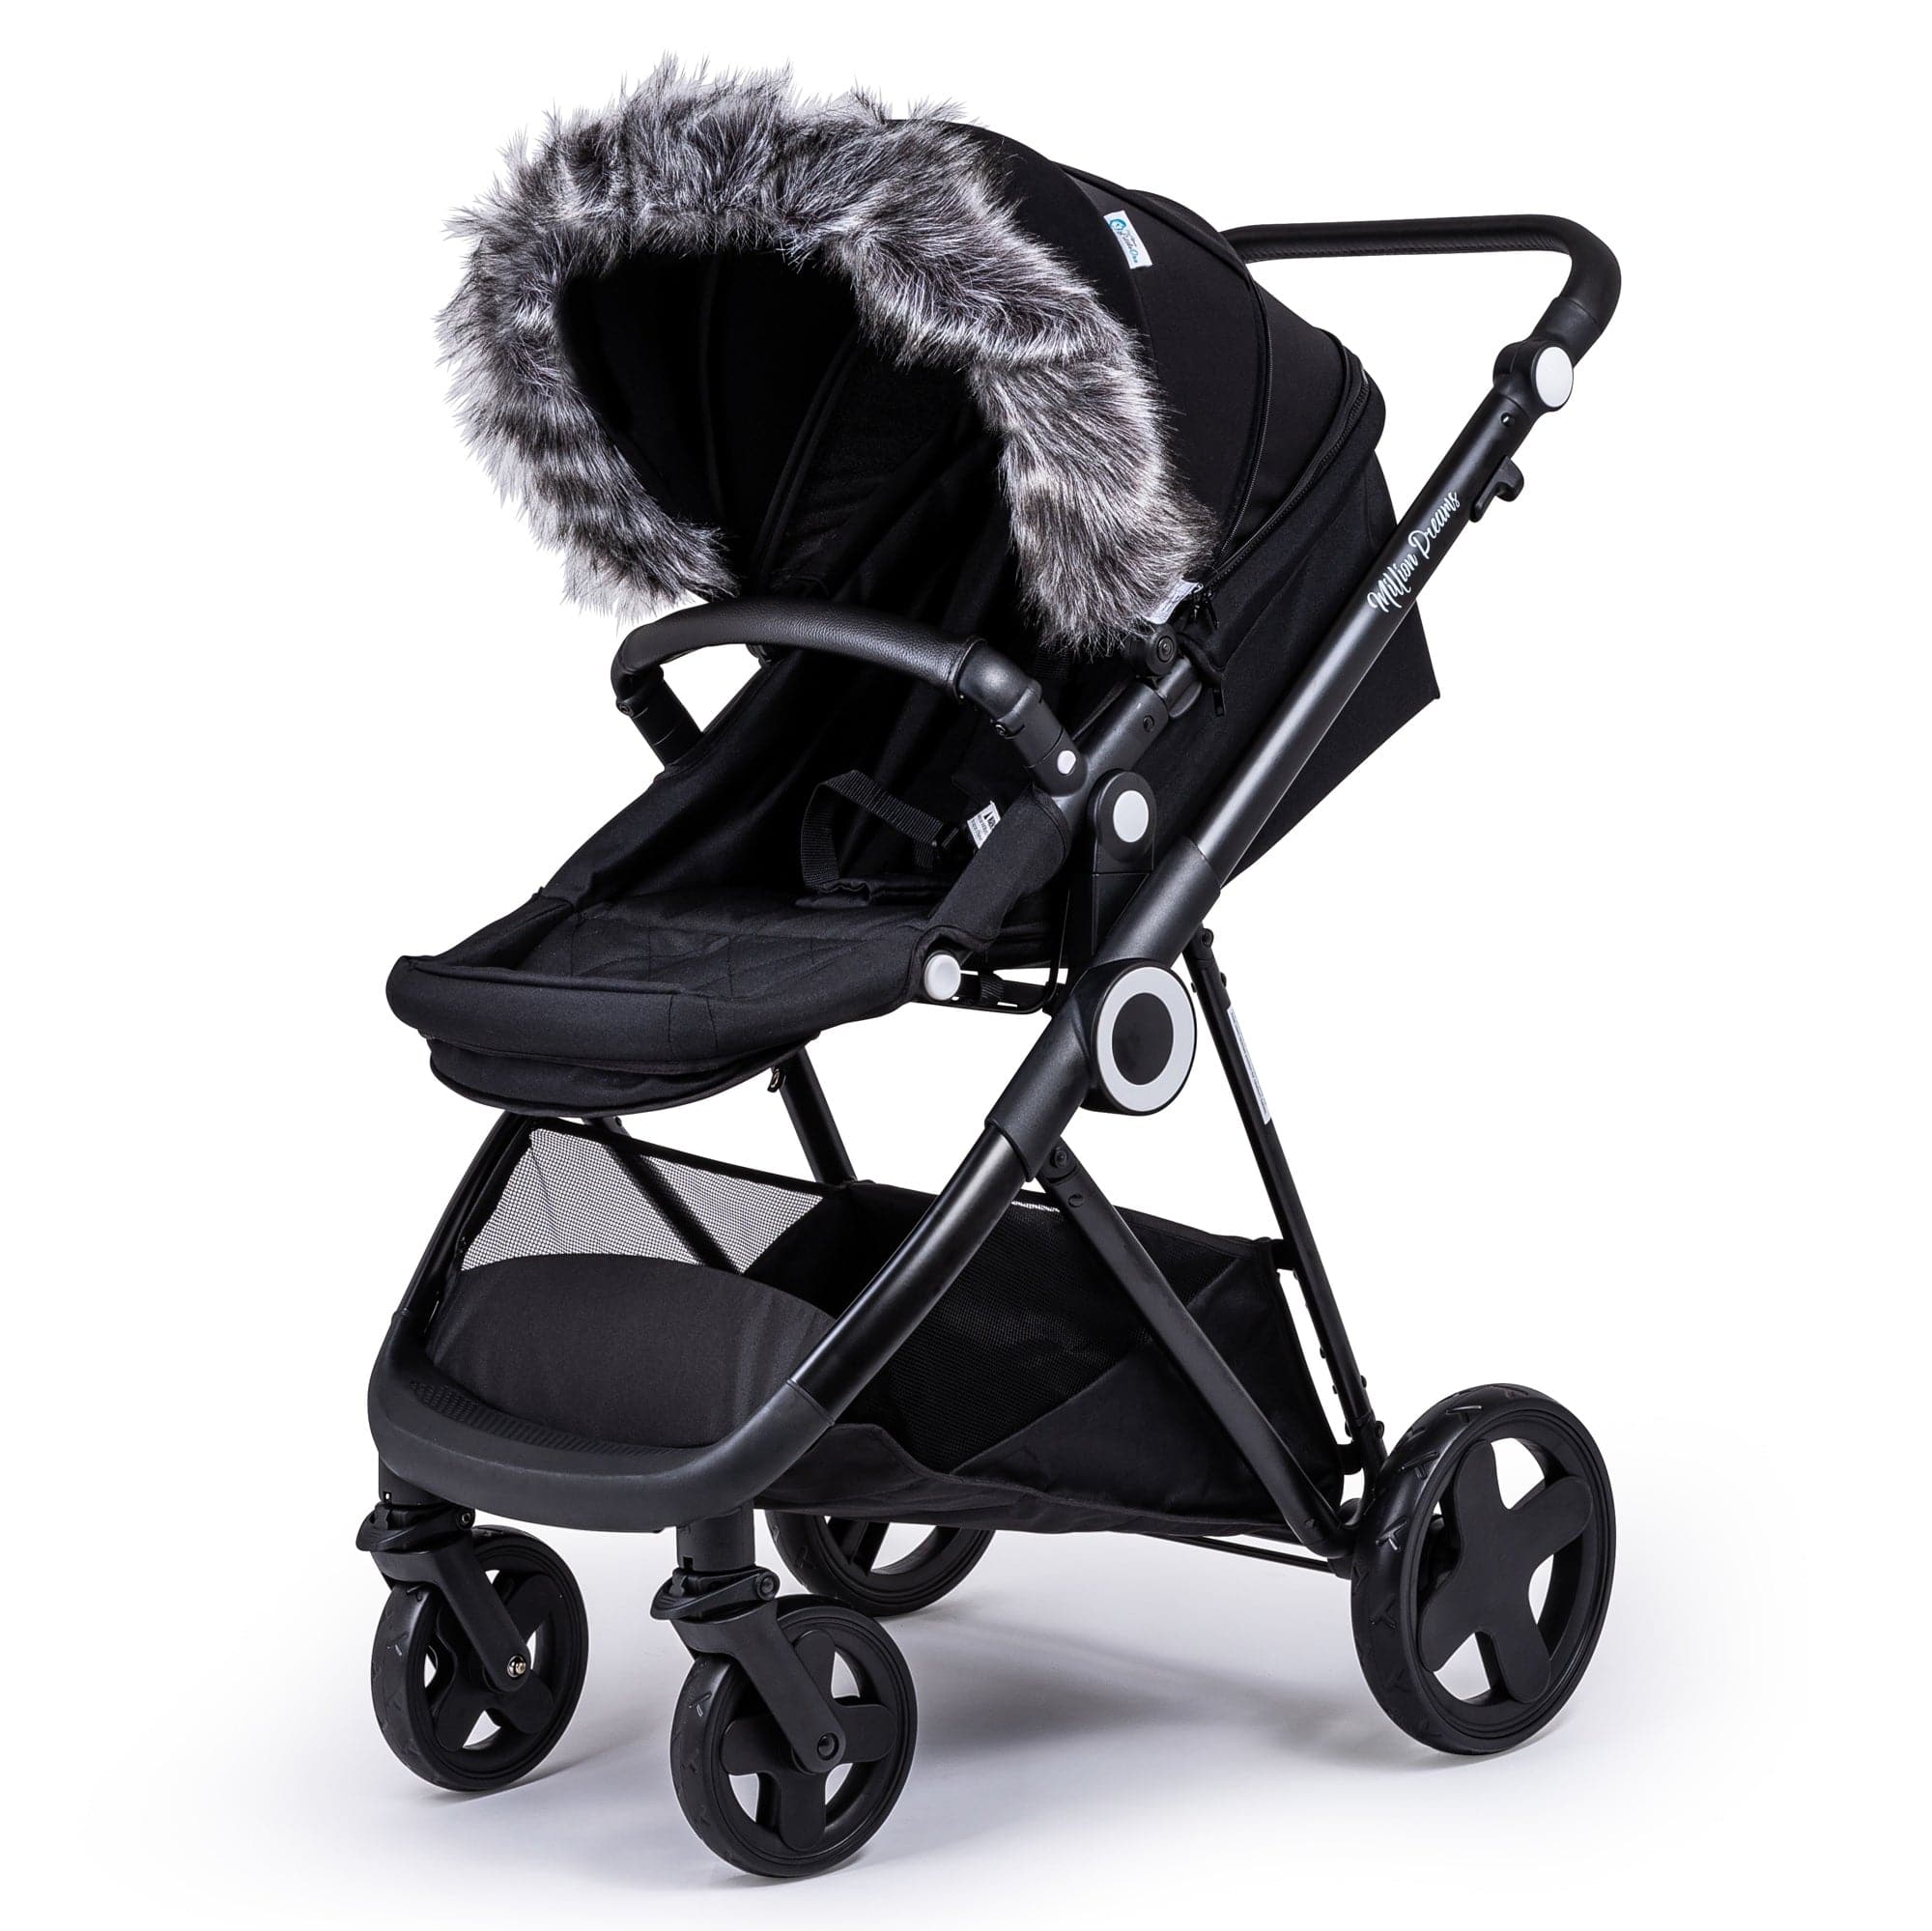 Pram Fur Hood Trim Attachment For Pushchair Compatible with Mee-Go - Dark Grey / Fits All Models | For Your Little One